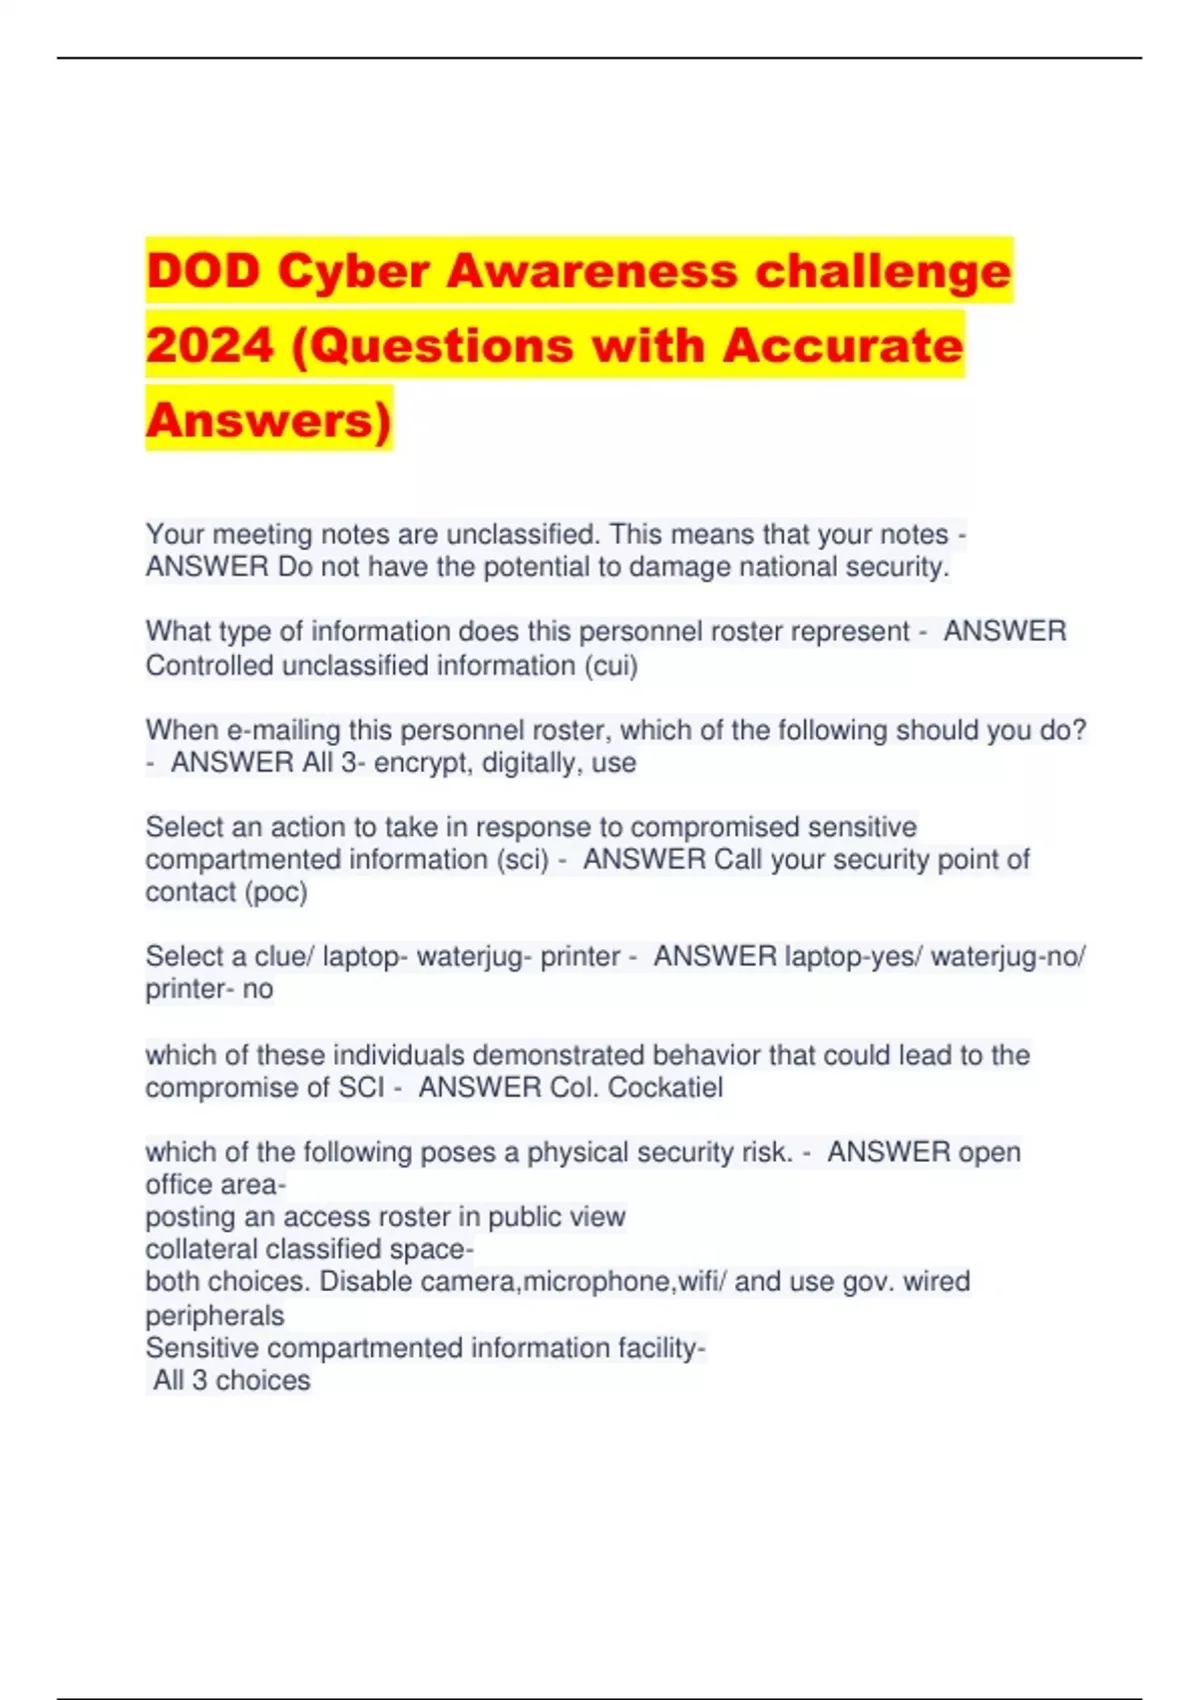 DOD Cyber Awareness challenge 2024 (Questions with Accurate Answers